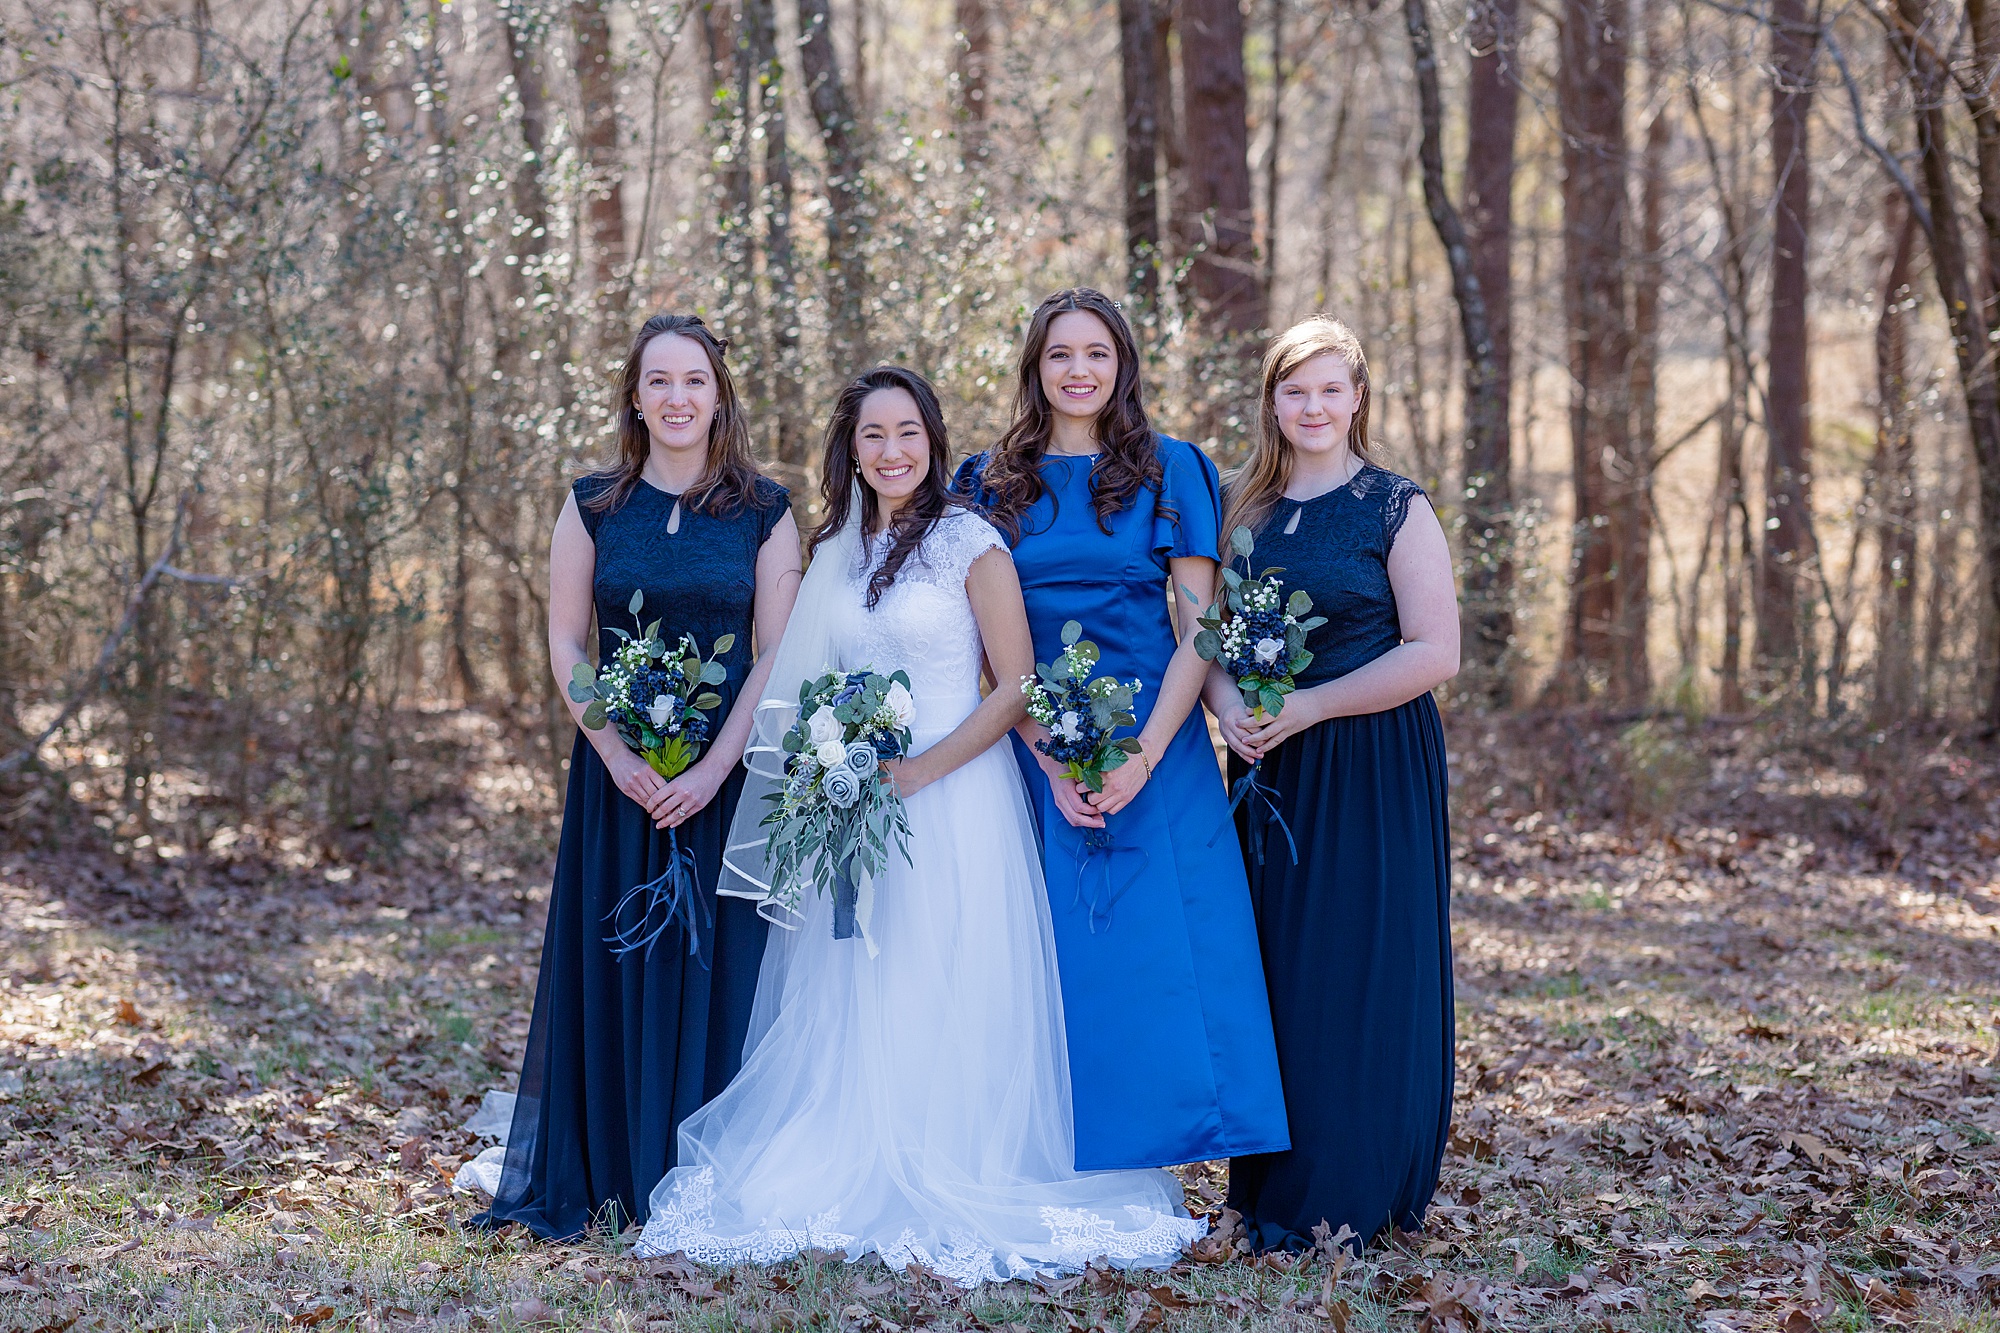 bride poses with bridesmaids in navy and blue gowns